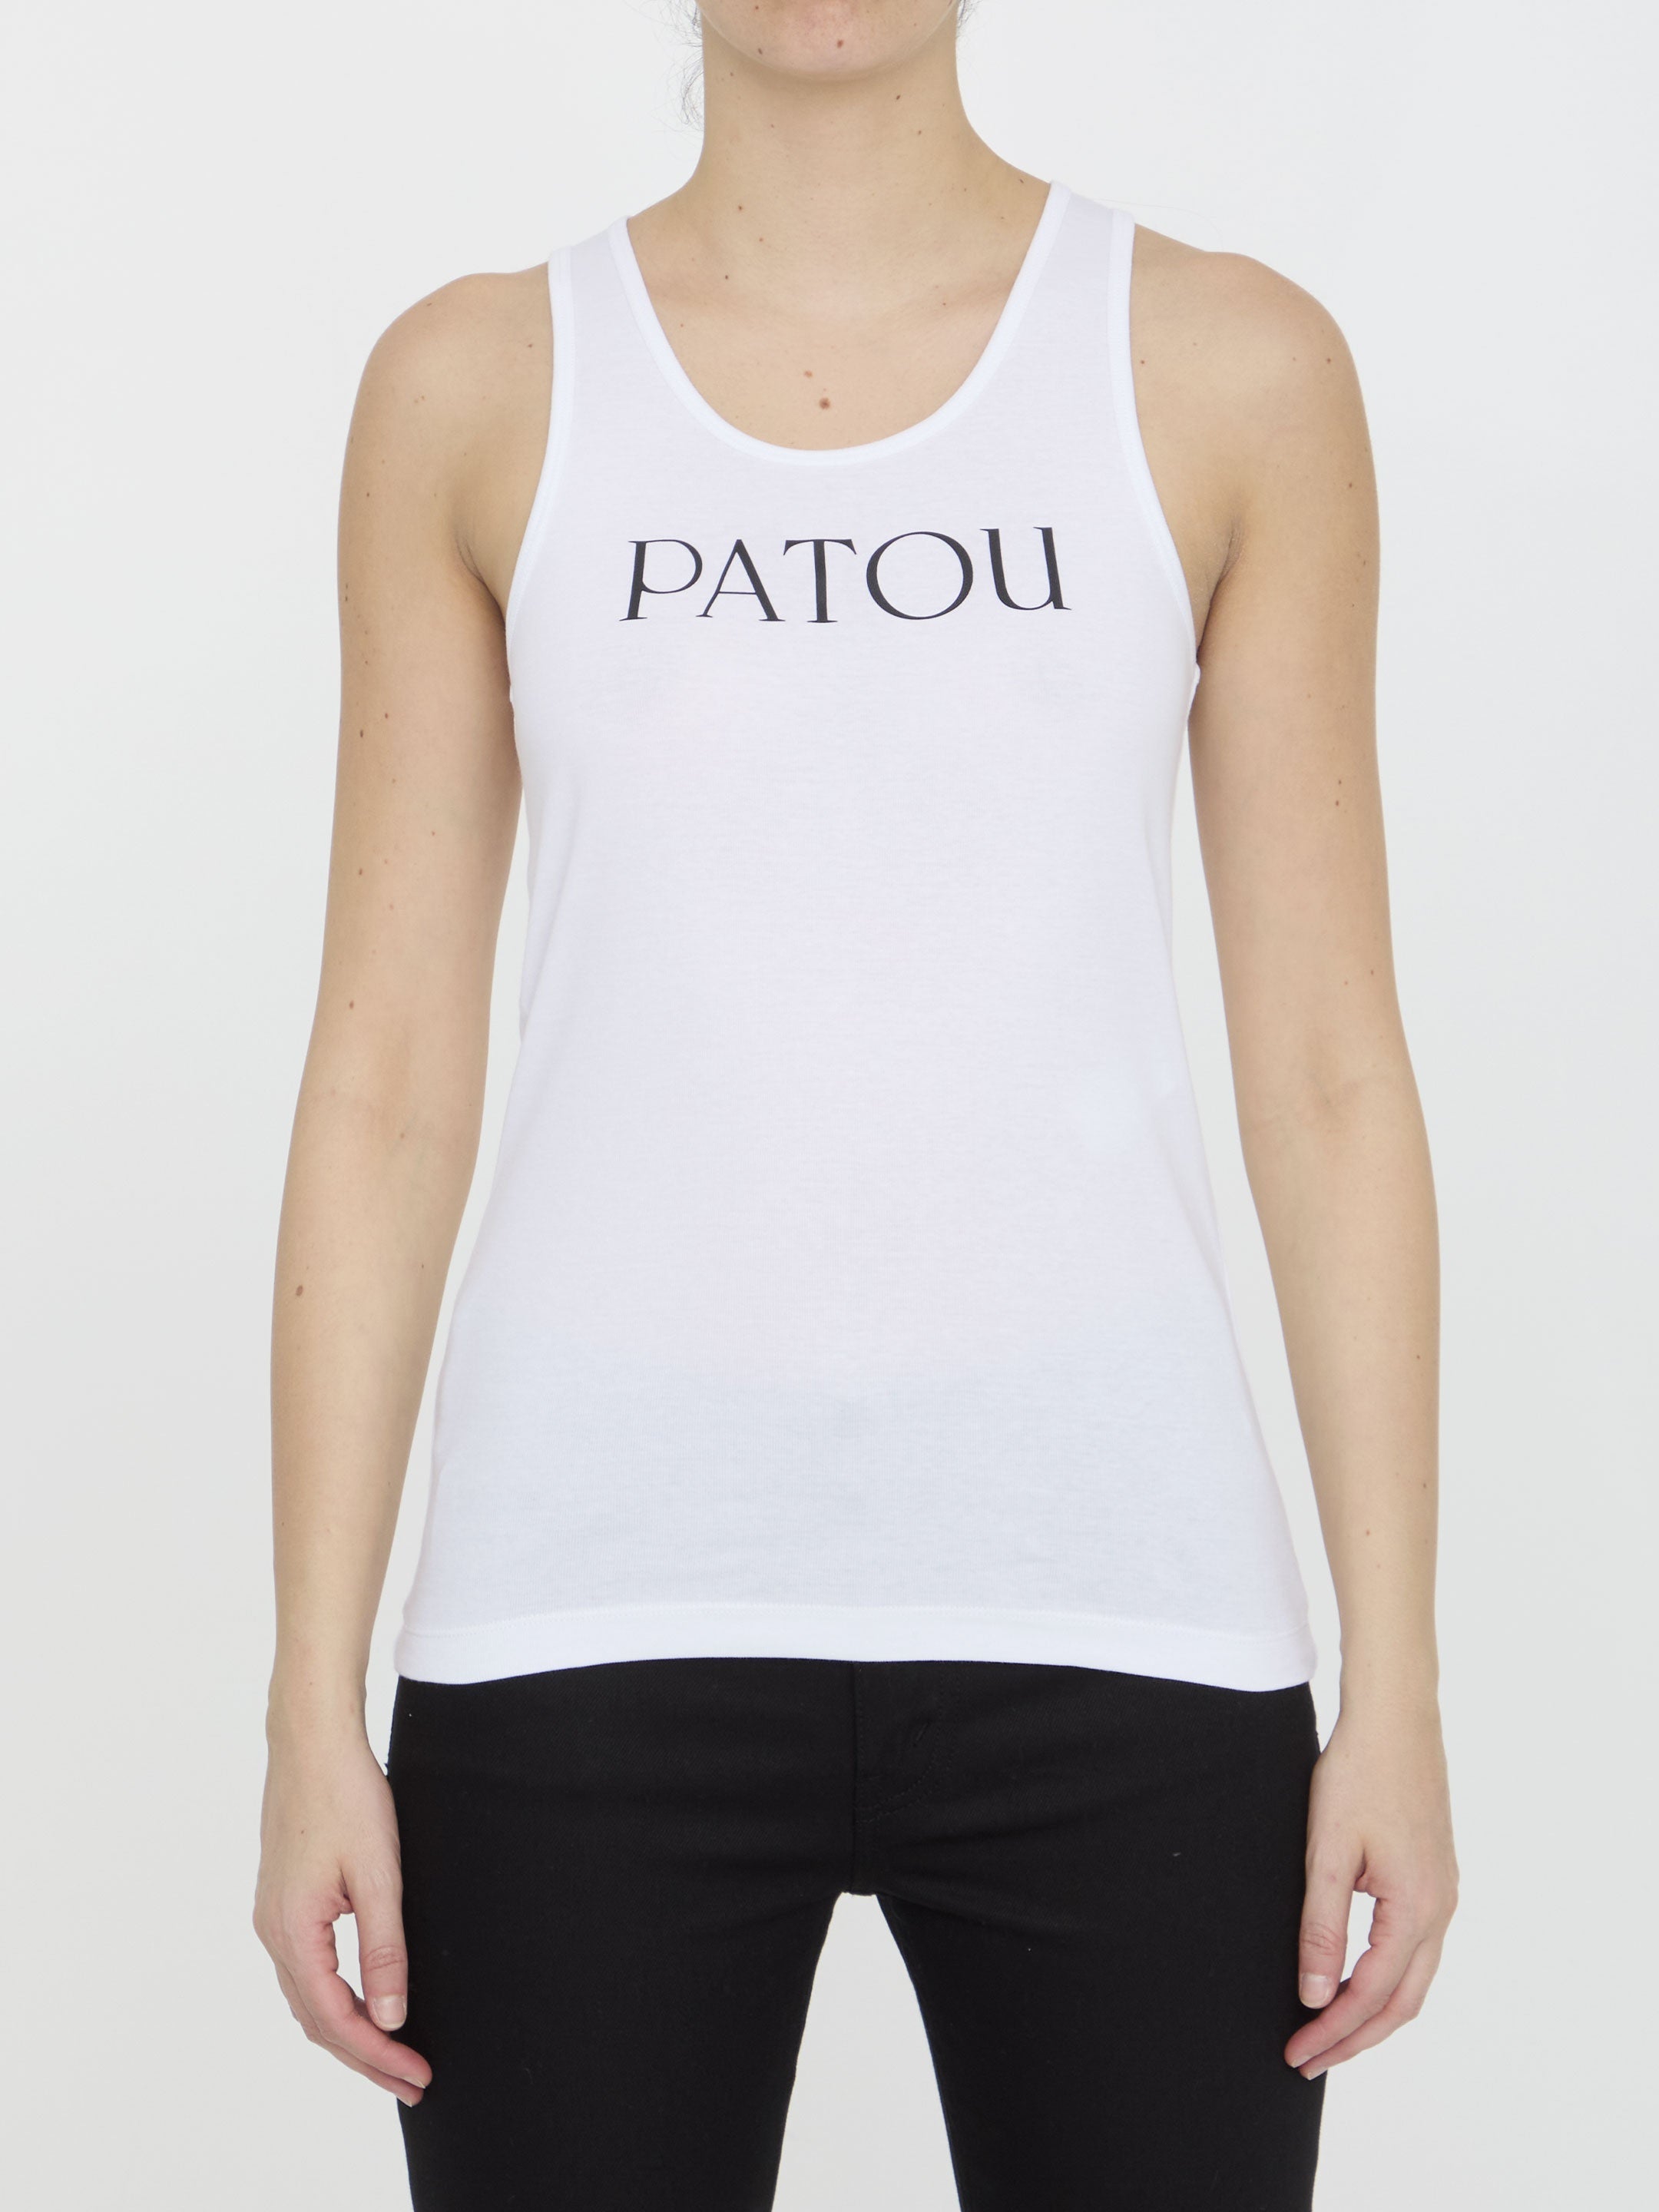 PATOU-OUTLET-SALE-Iconic-tank-top-Shirts-S-WHITE-ARCHIVE-COLLECTION.jpg